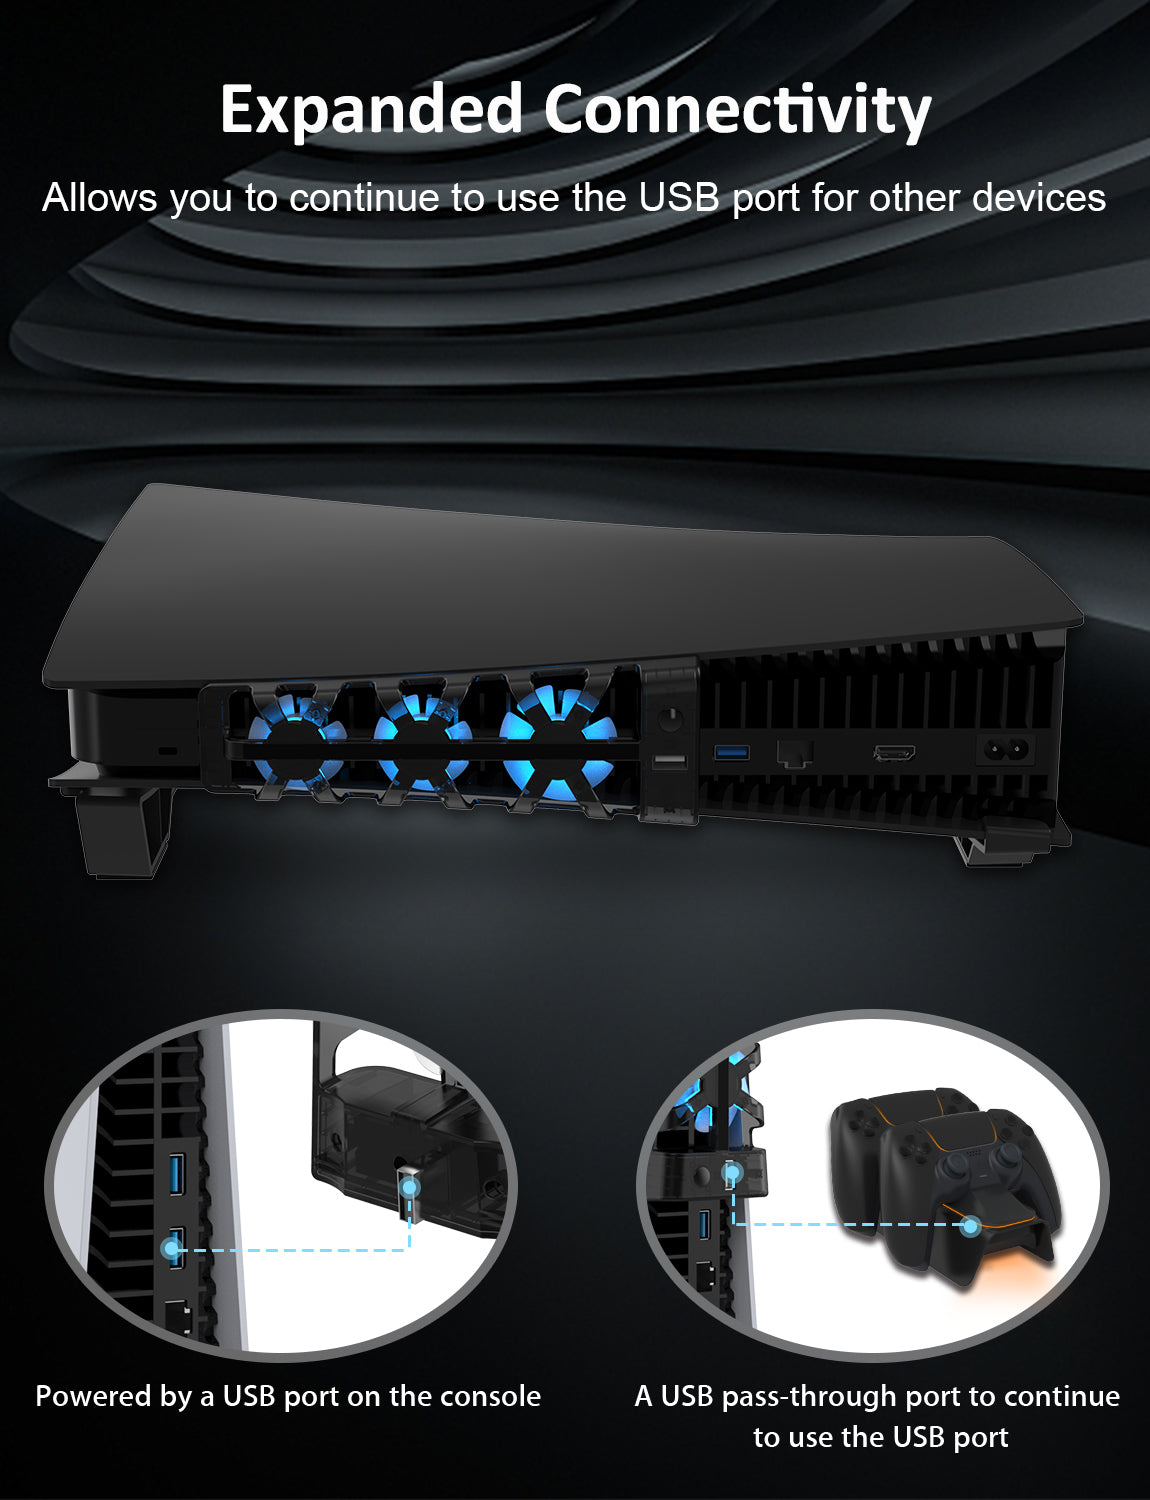 The expansion port on the cooling fan allows you to connect the console to other devices.